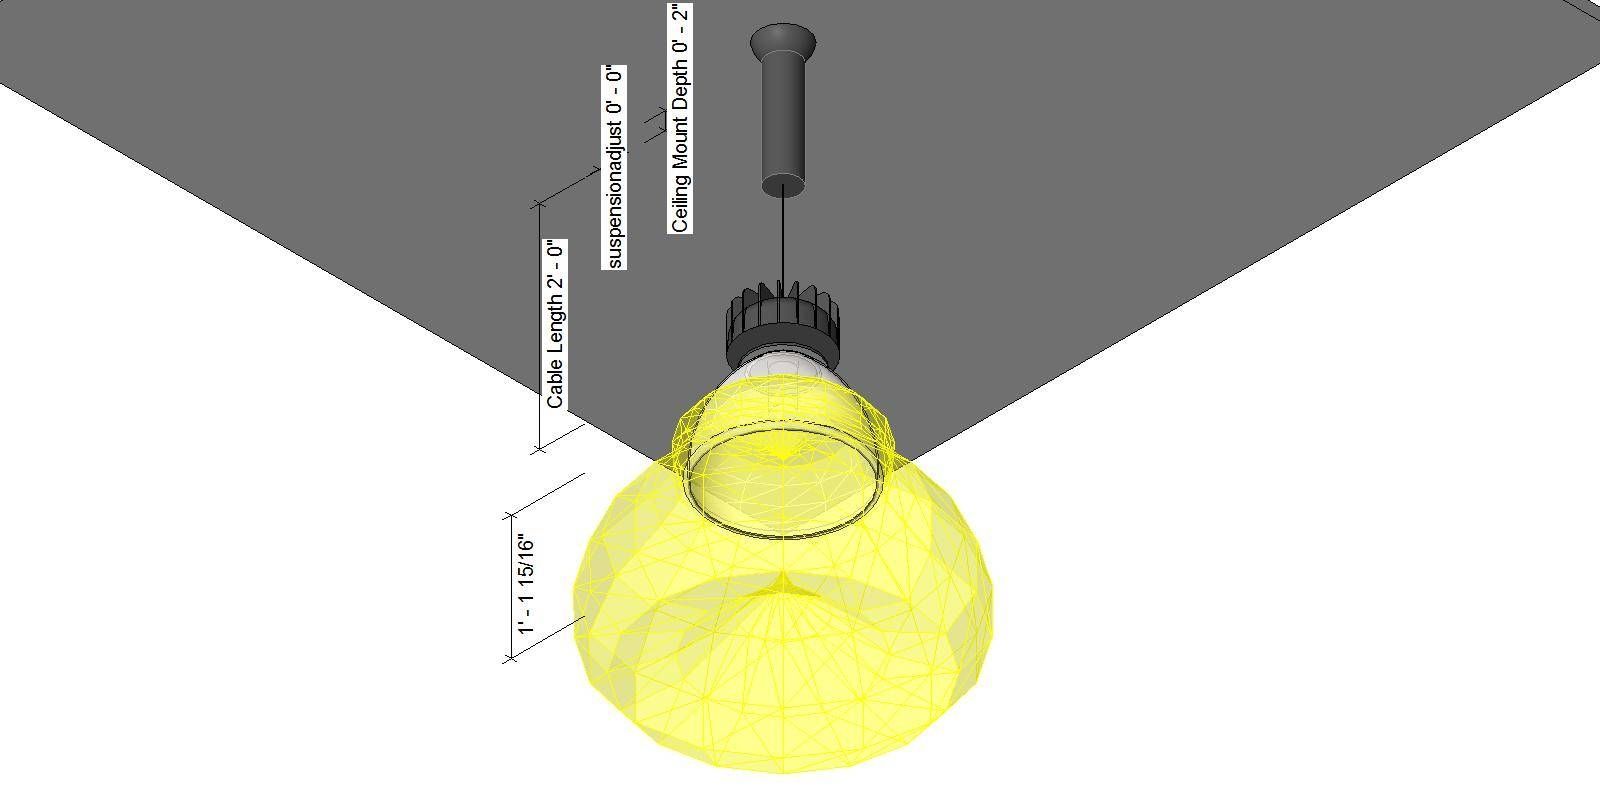 Bim Objects / Families With Regard To Revit Pendant Lighting (View 6 of 15)